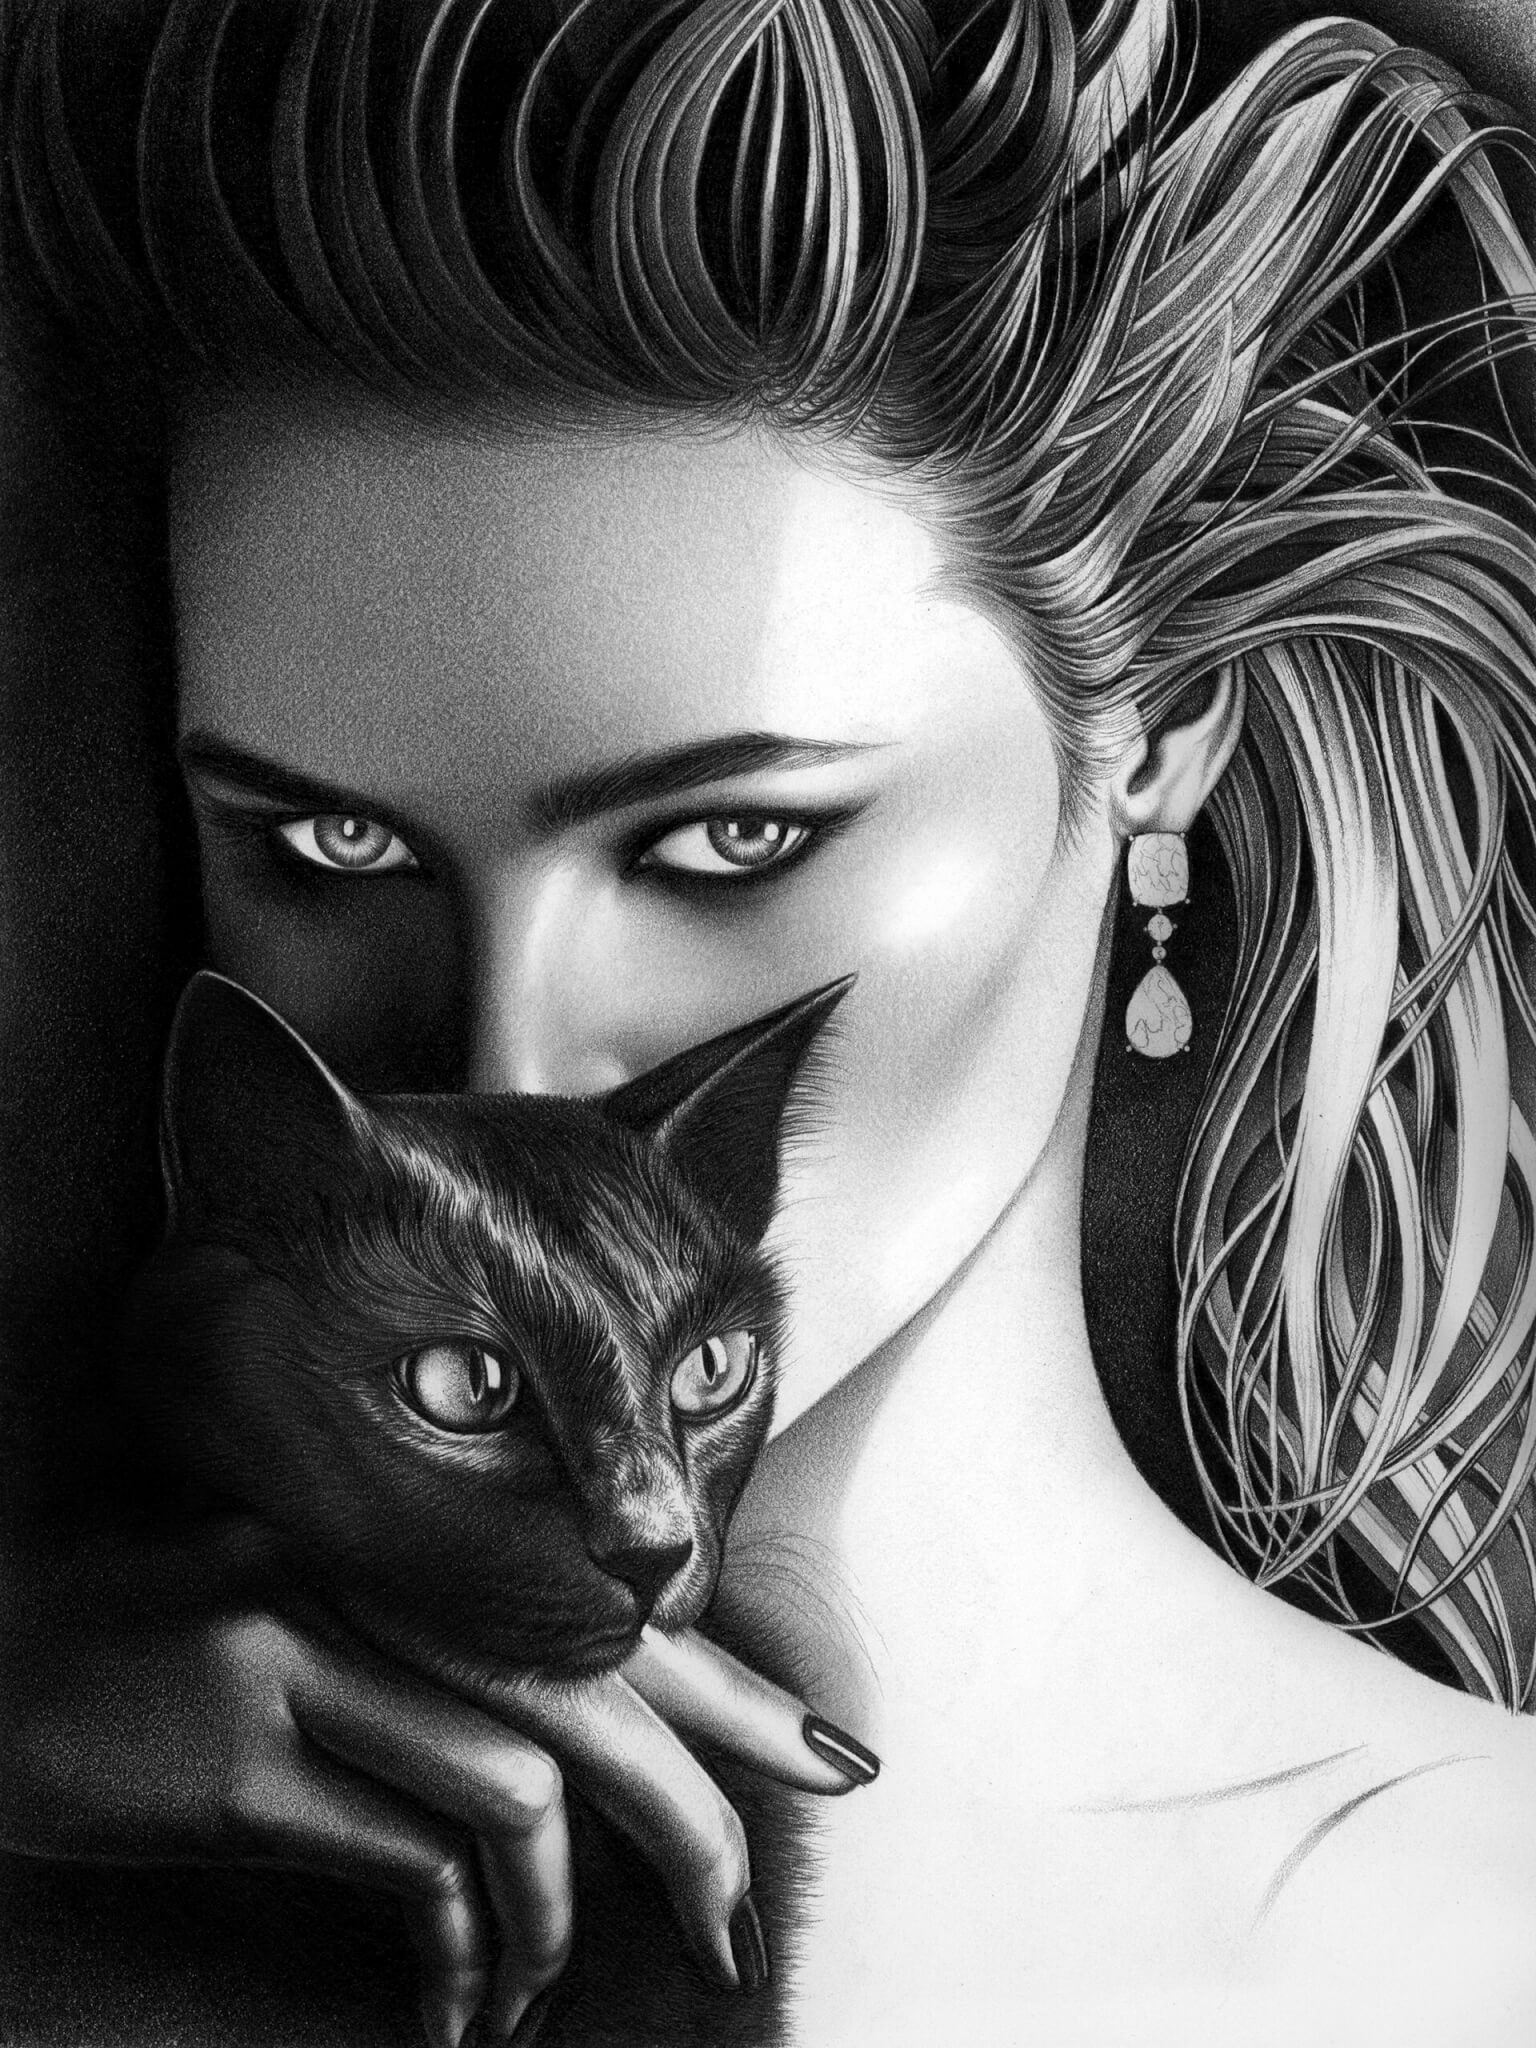 Lady with the Angry Eyes (holding a black cat)